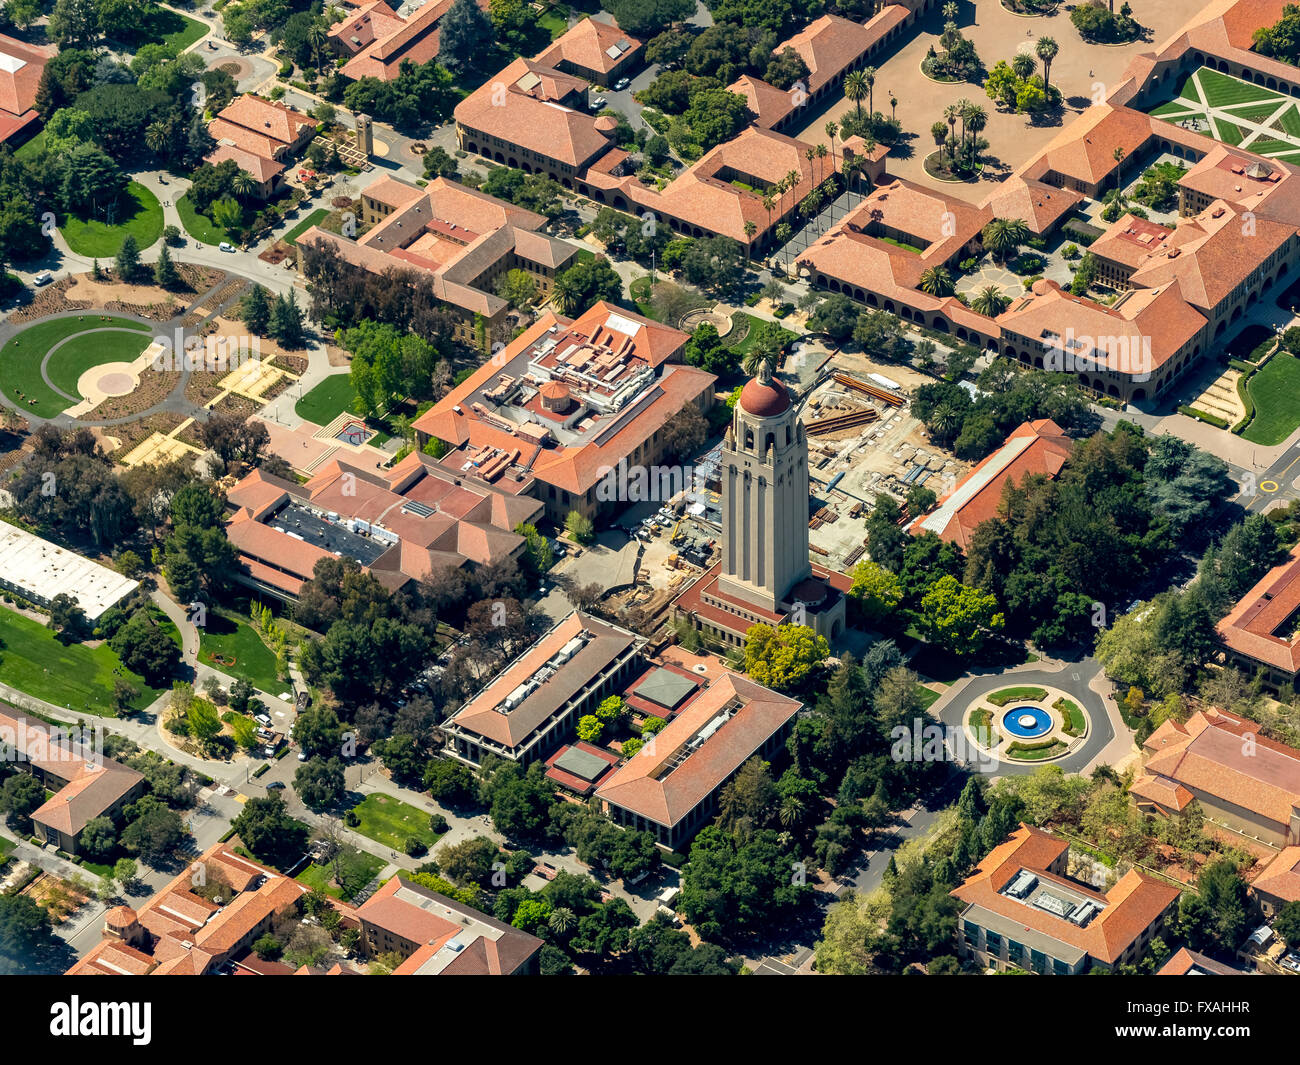 University Campus Stanford University with Hoover Tower, Palo Alto, California, Silicon Valley, California, USA Stock Photo